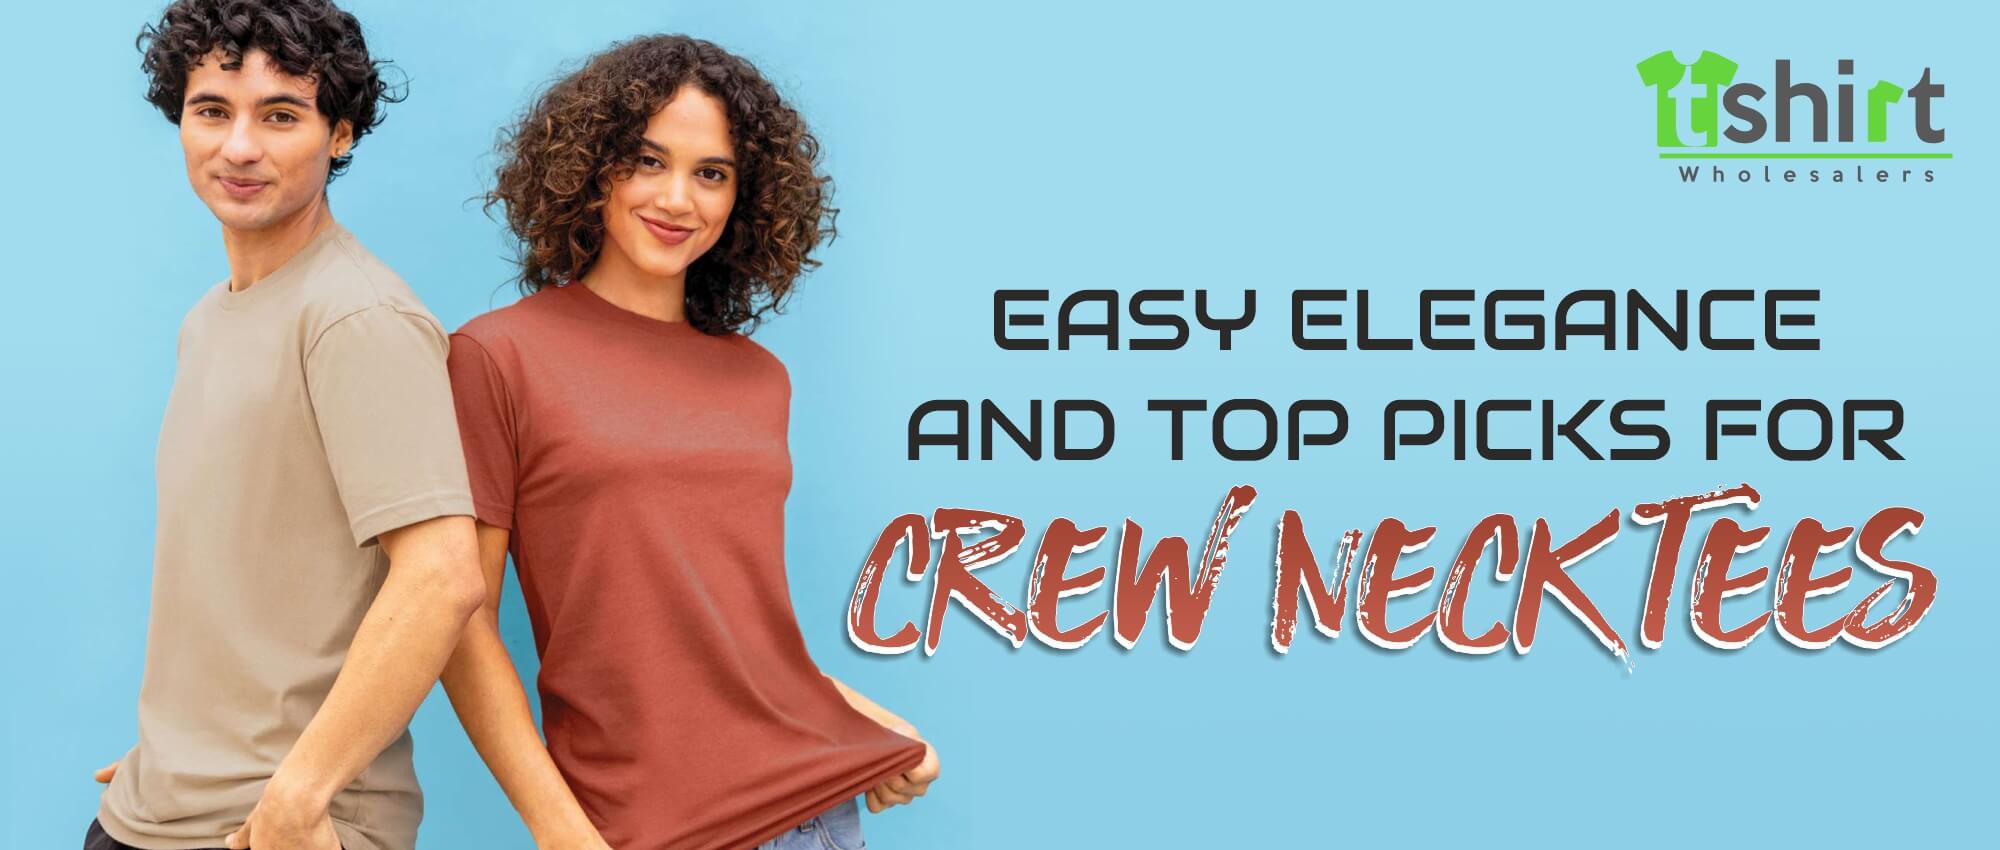 EASY ELEGANCE AND TOP PICKS FOR CREW NECK TEES